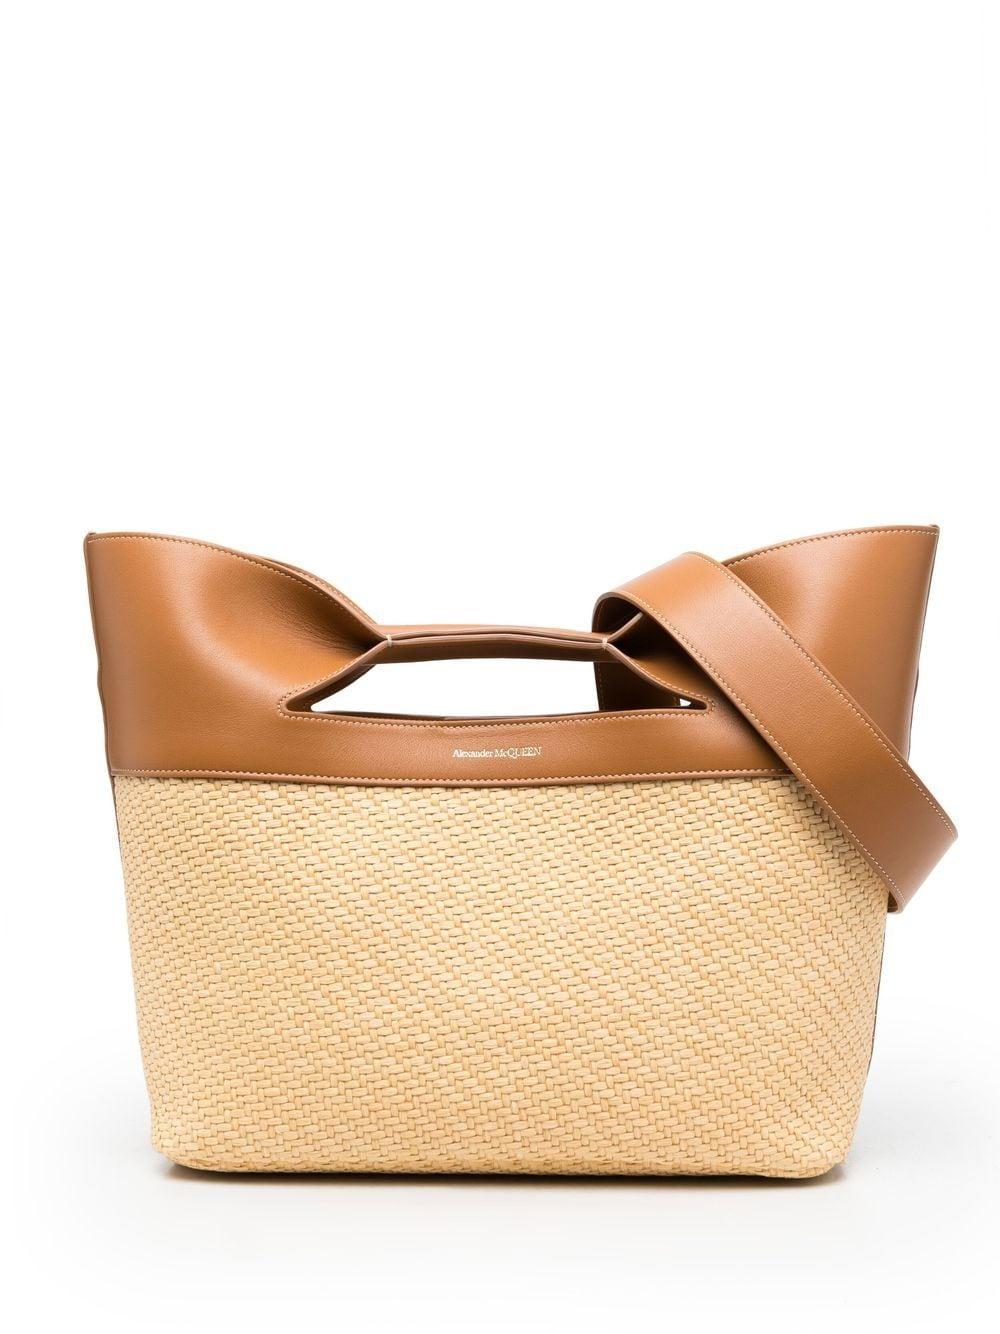 Remisión comportarse Nabo Alexander McQueen The Bow Leather And Raffia Tote Bag | Lyst